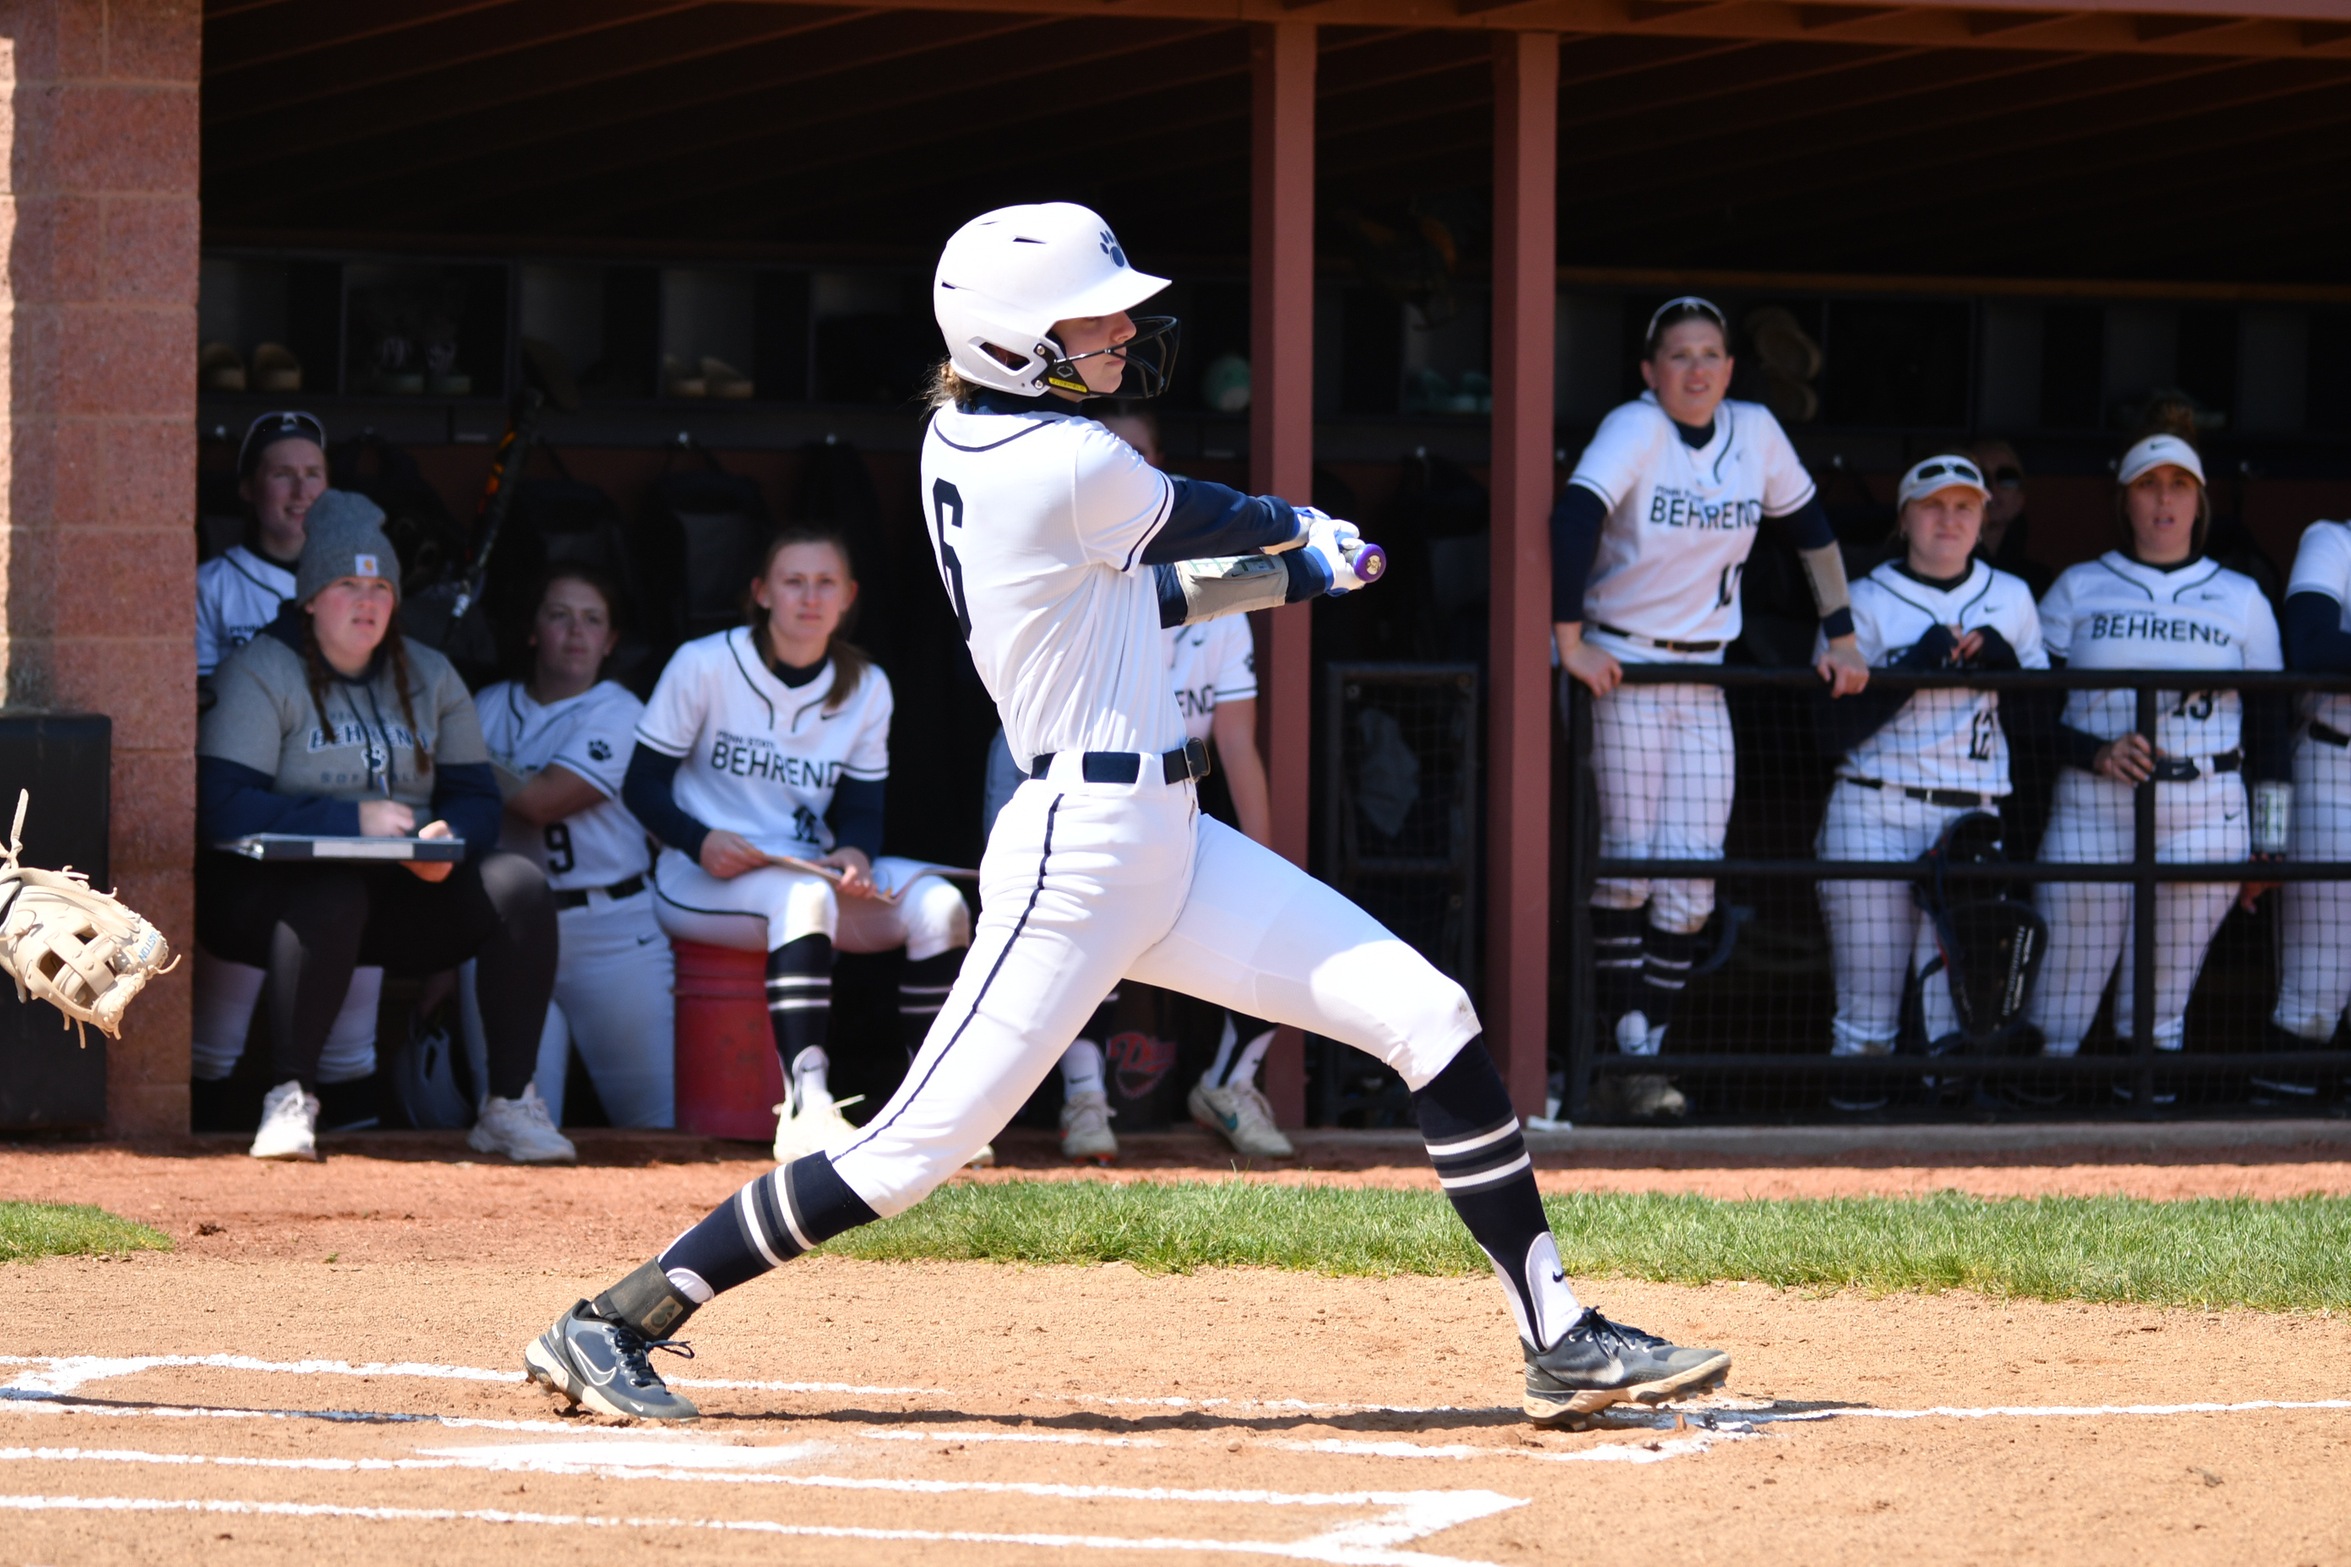 Mt. Union Takes Two From Behrend Softball